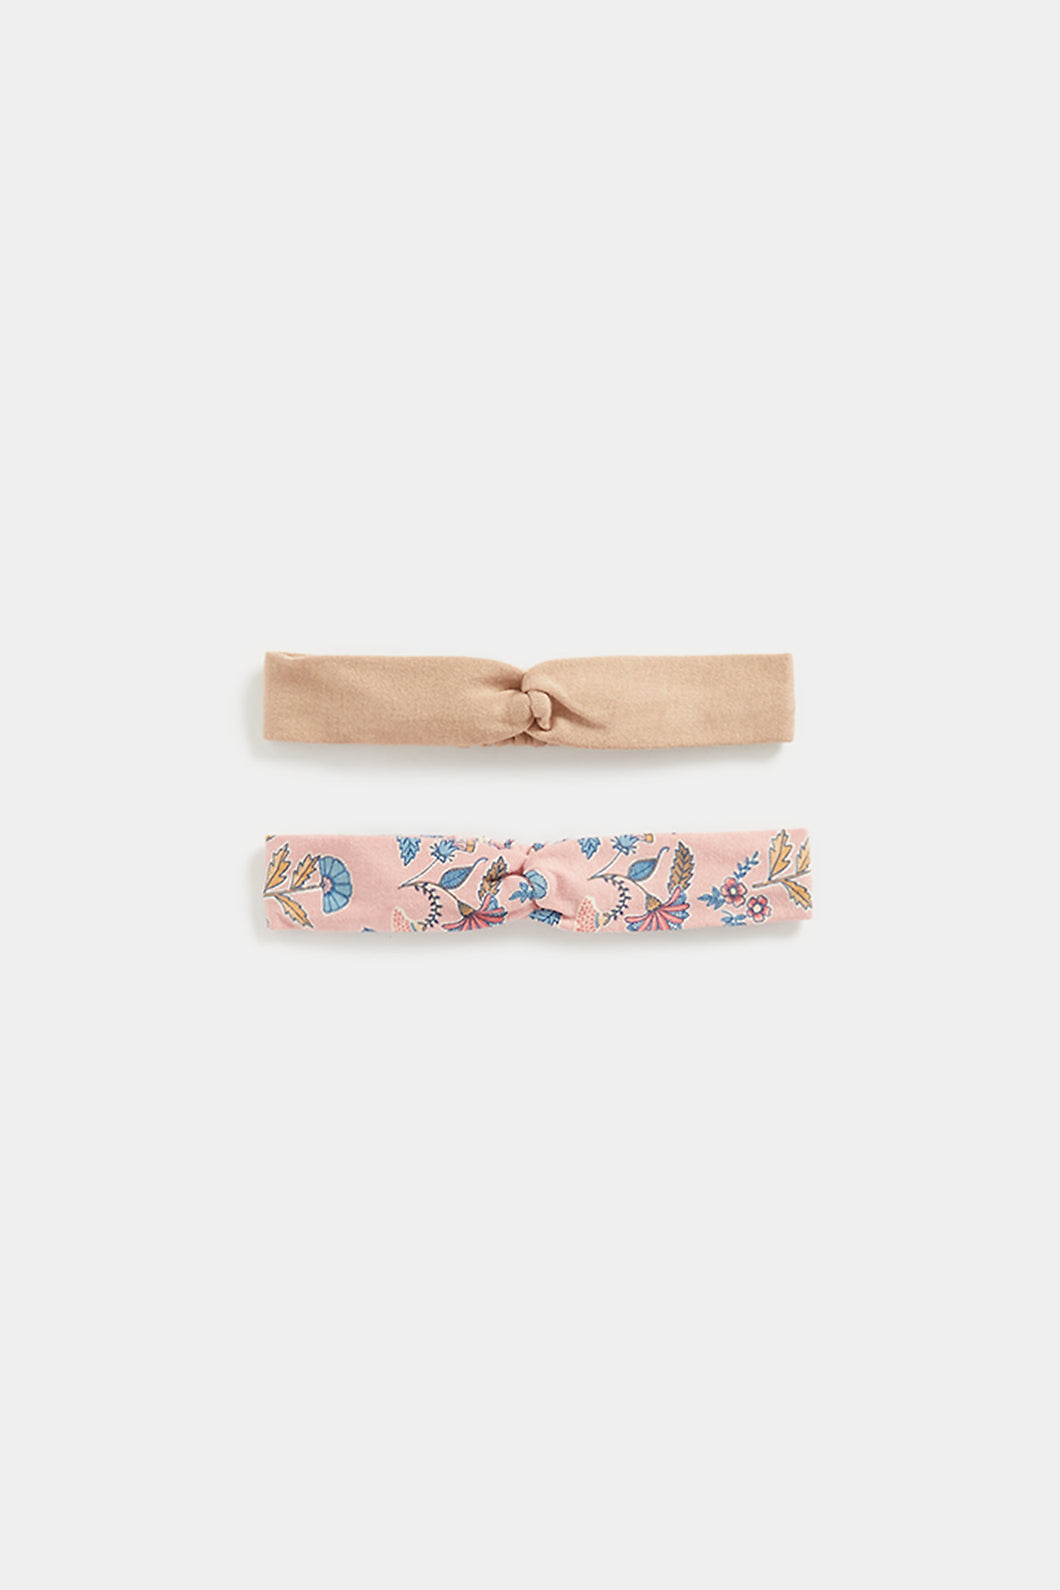 Mothercare Pink Bunny Headbands - 2 Pack